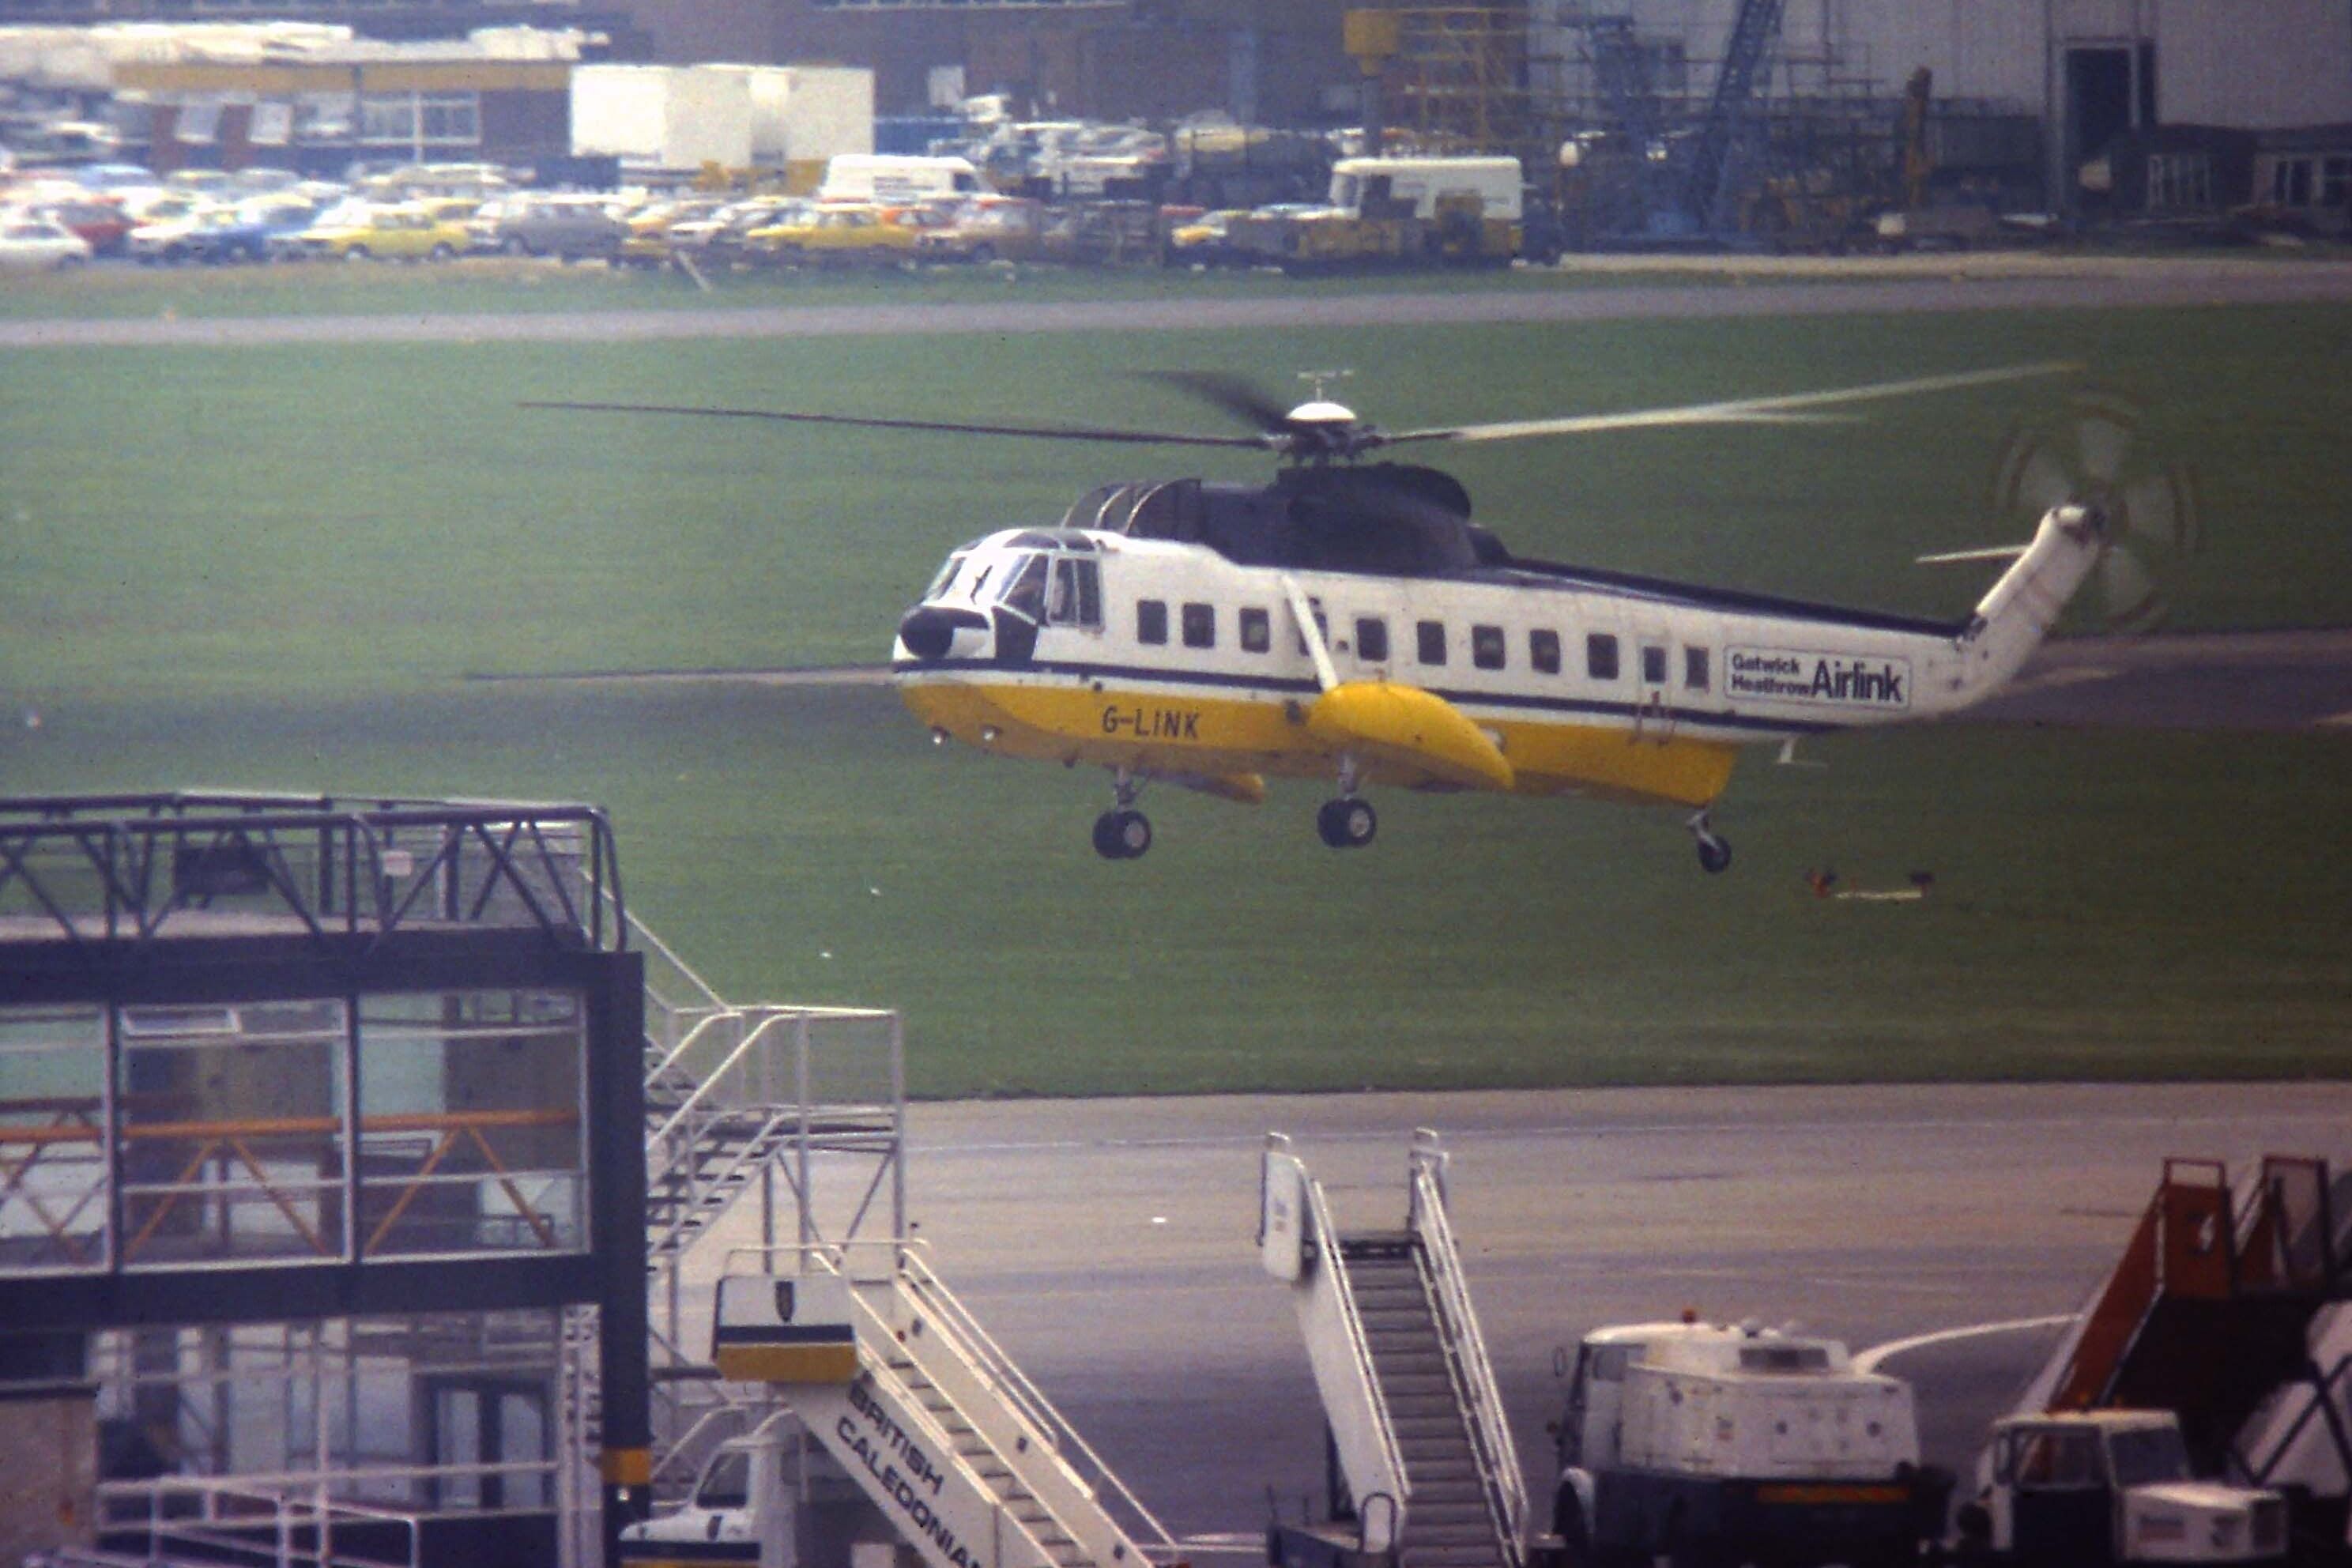 Gatwick - Heathrow's 'Airlink' shuttle in the form of Sikorsky S-61N G-LINK caught arriving by the old South Pier at Gatwick sometime in the mid 1980's.